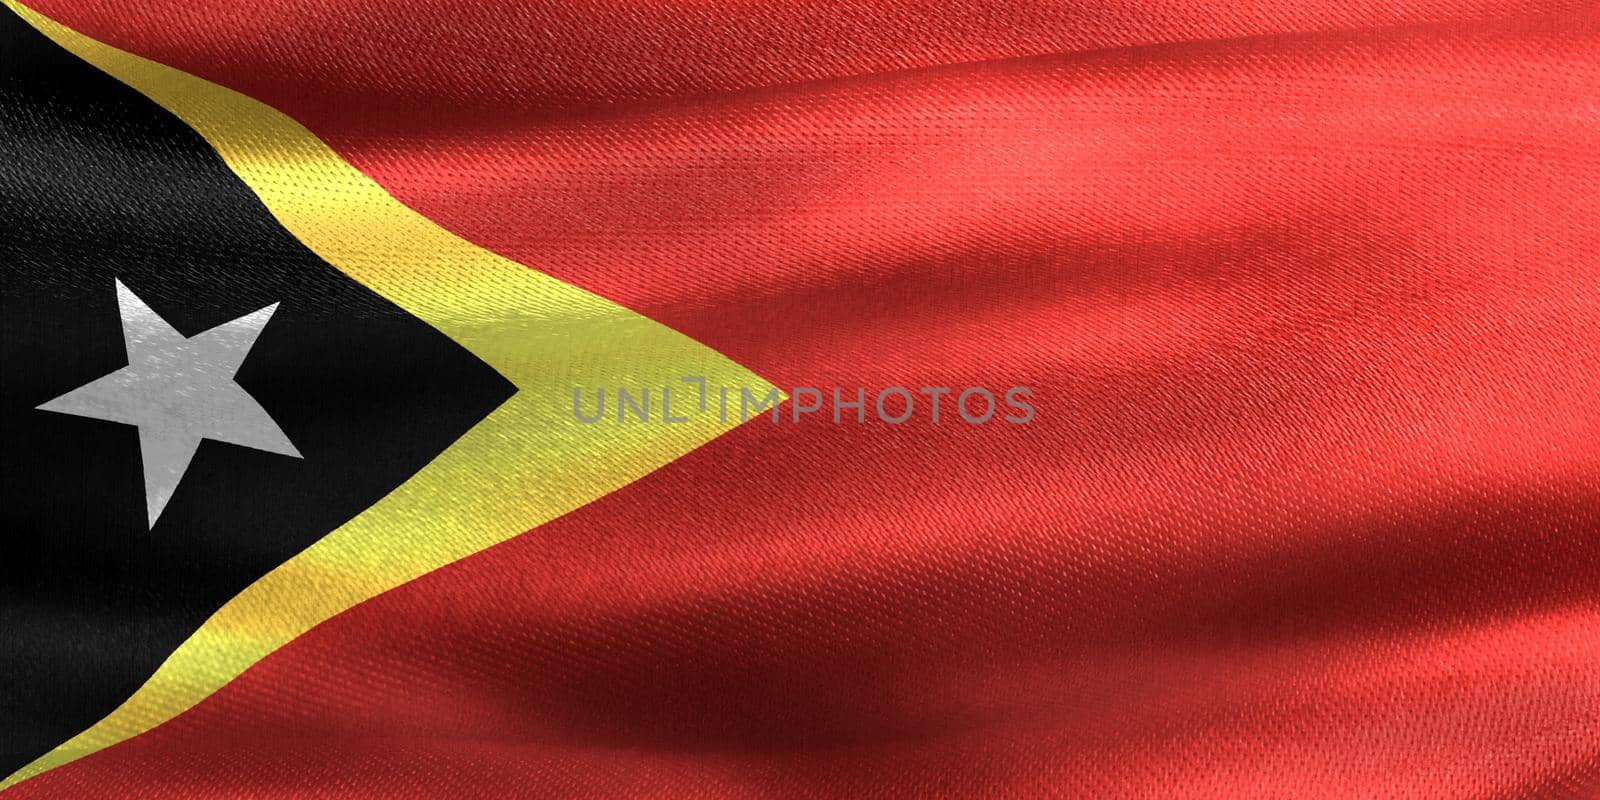 3D-Illustration of a East Timor flag - realistic waving fabric flag.